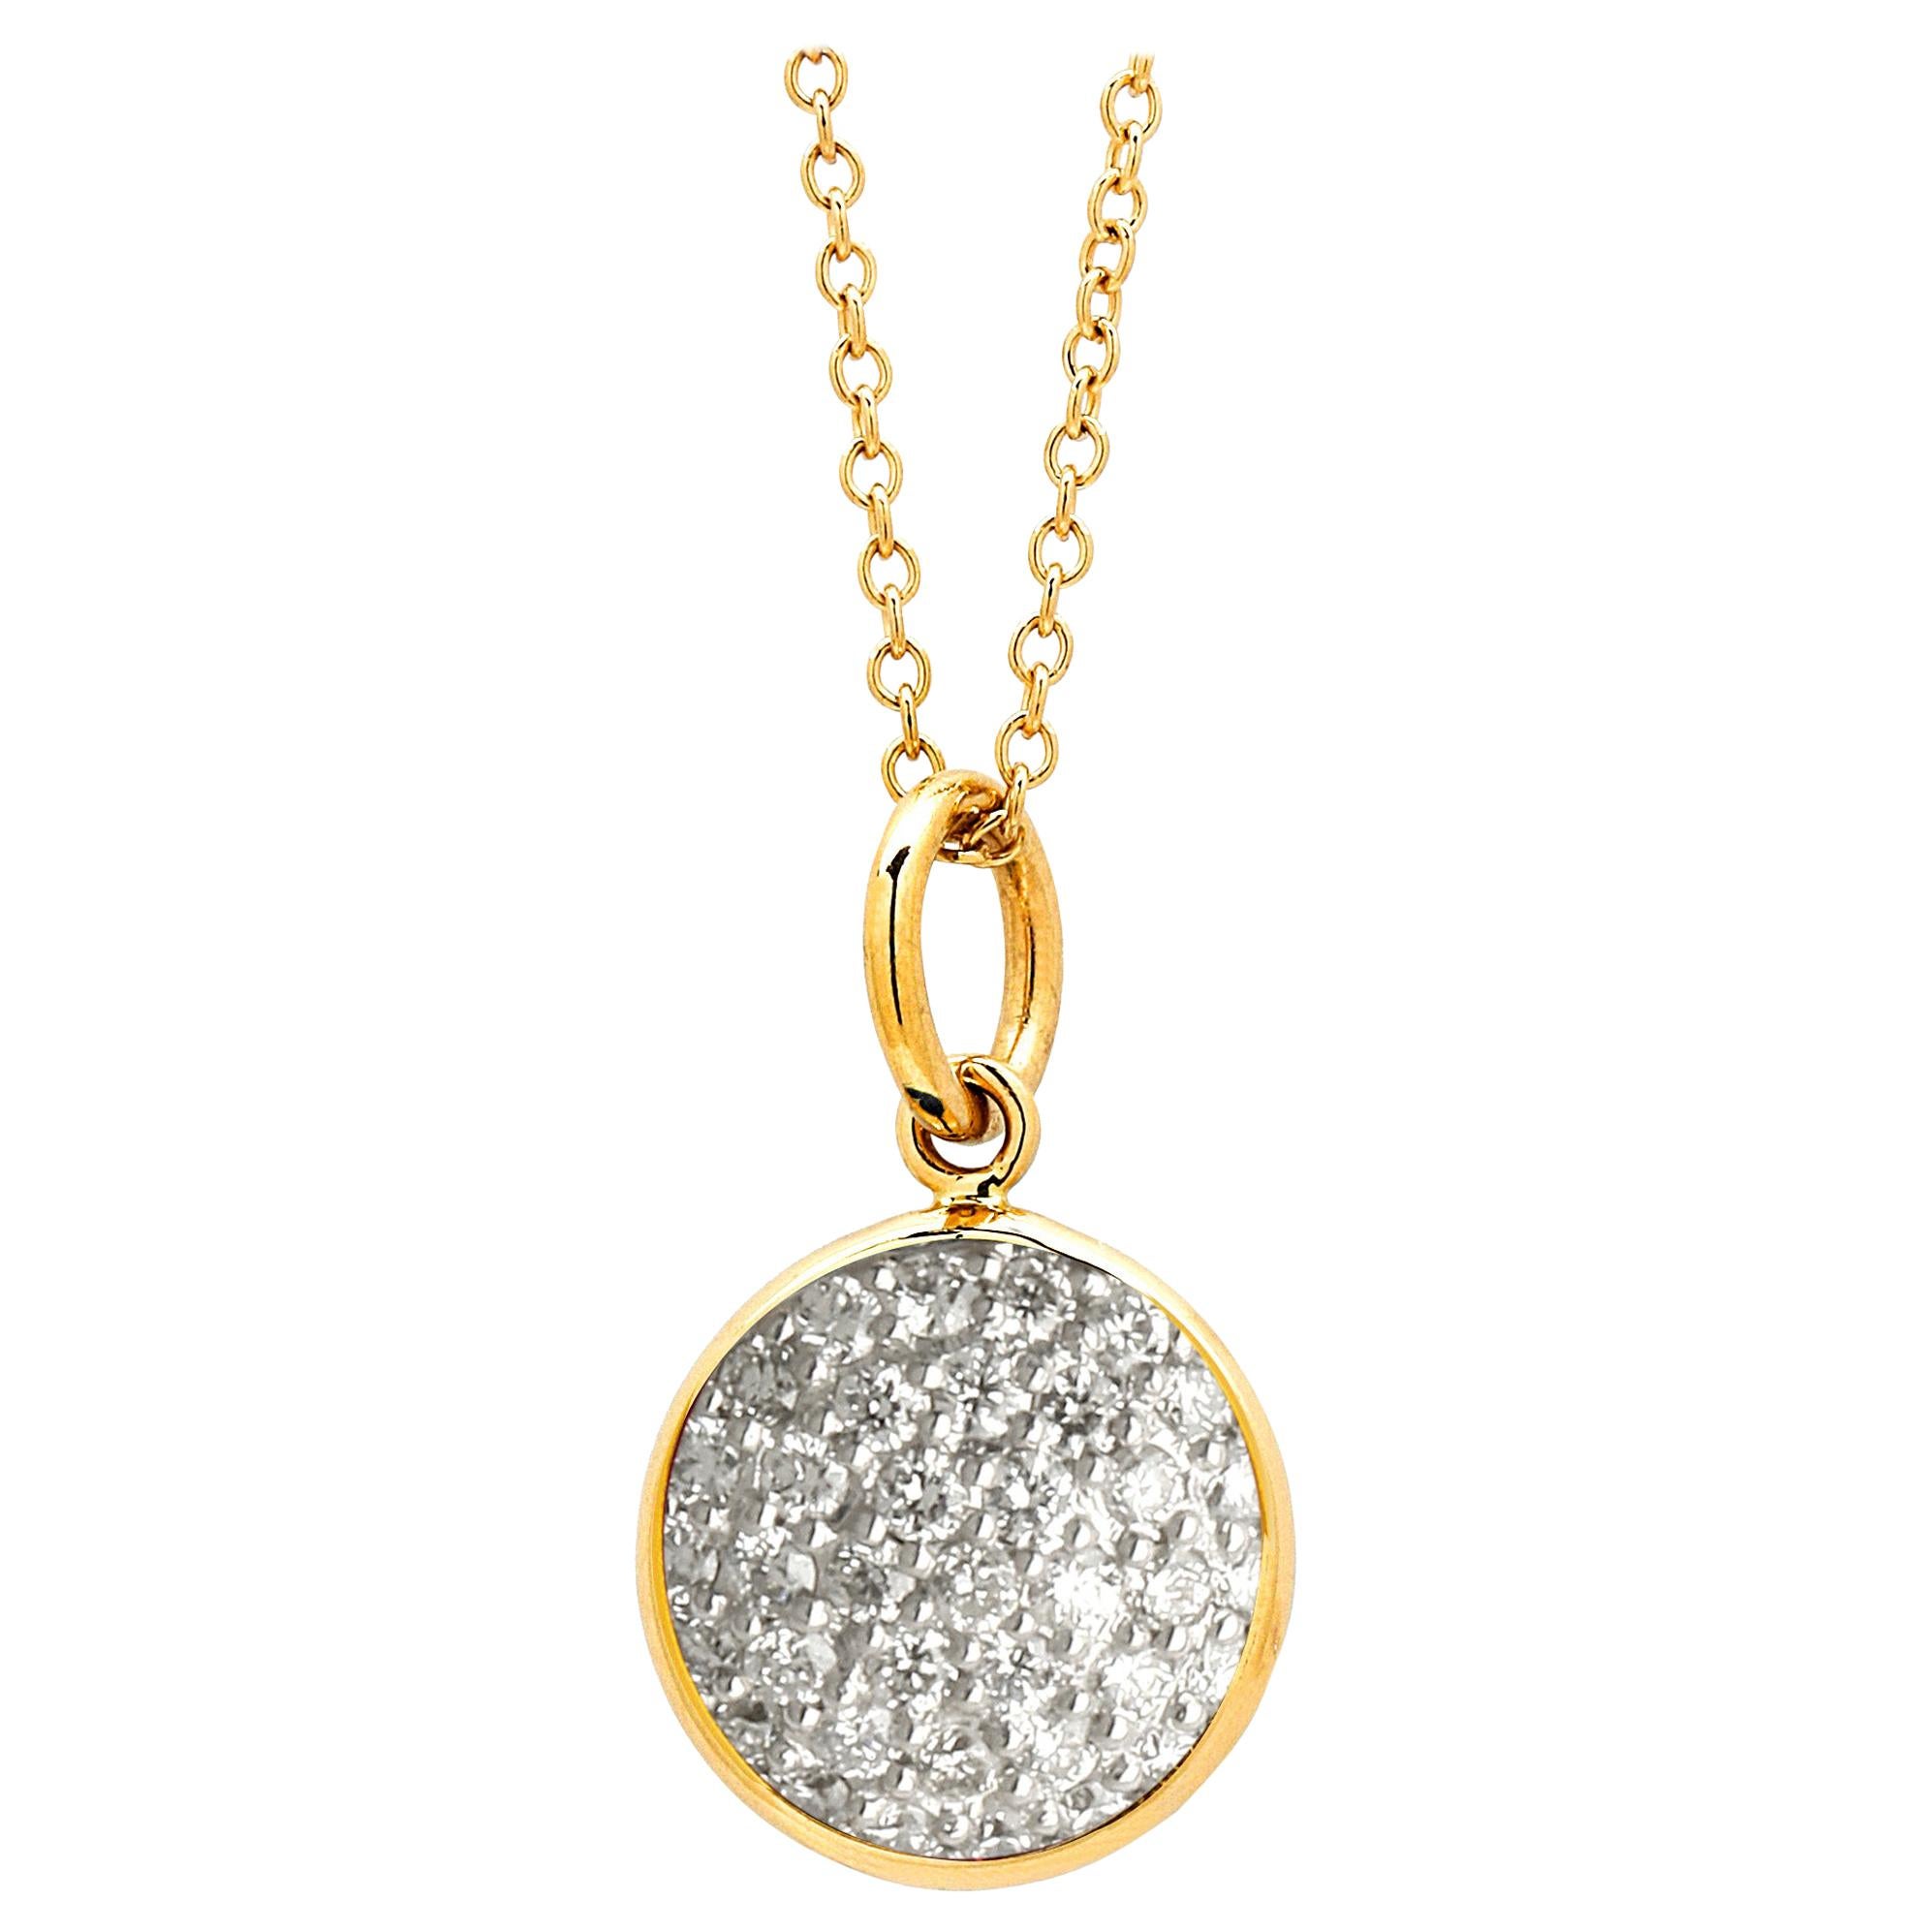 Syna Yellow Gold Charm Pendant with Diamonds